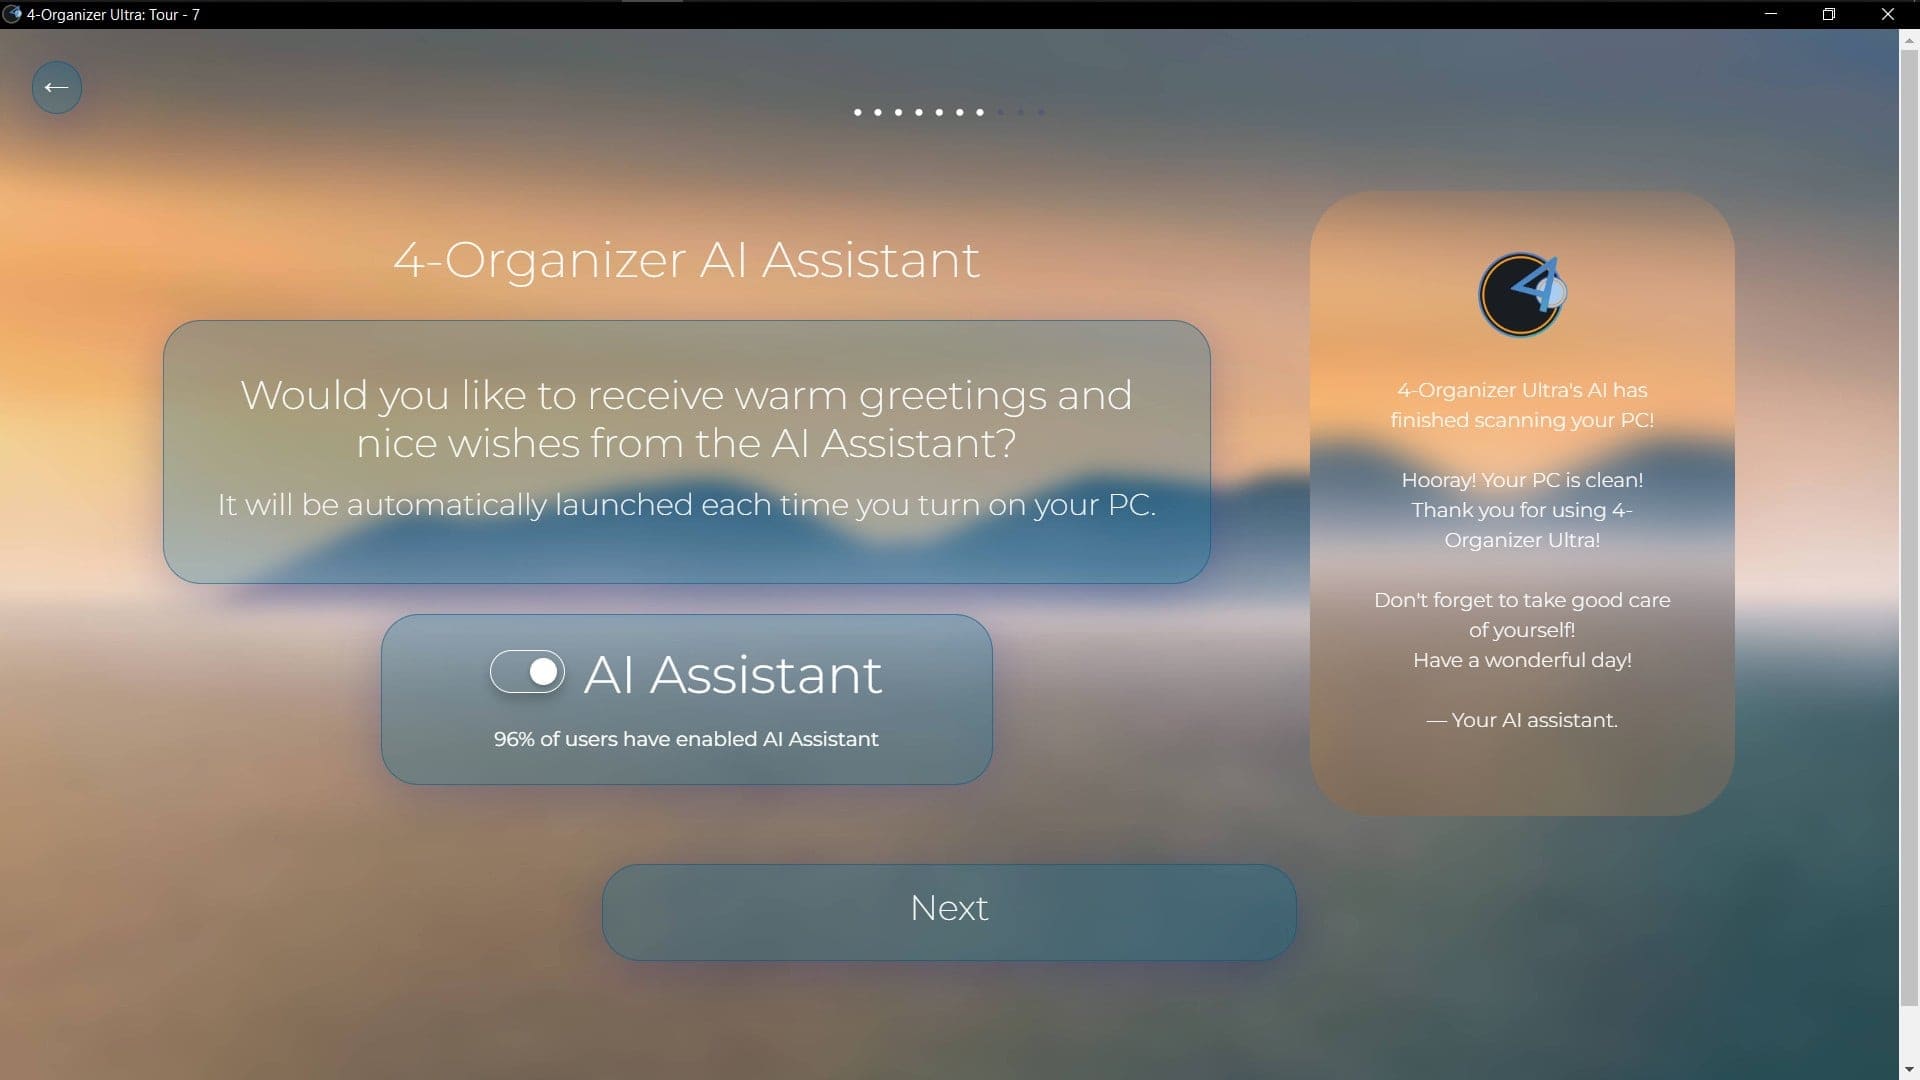 Screenshot of 'Setup Tour' window of 4-Organizer Ultra that allows user to enable or disable the 4-Organizer AI Assistant